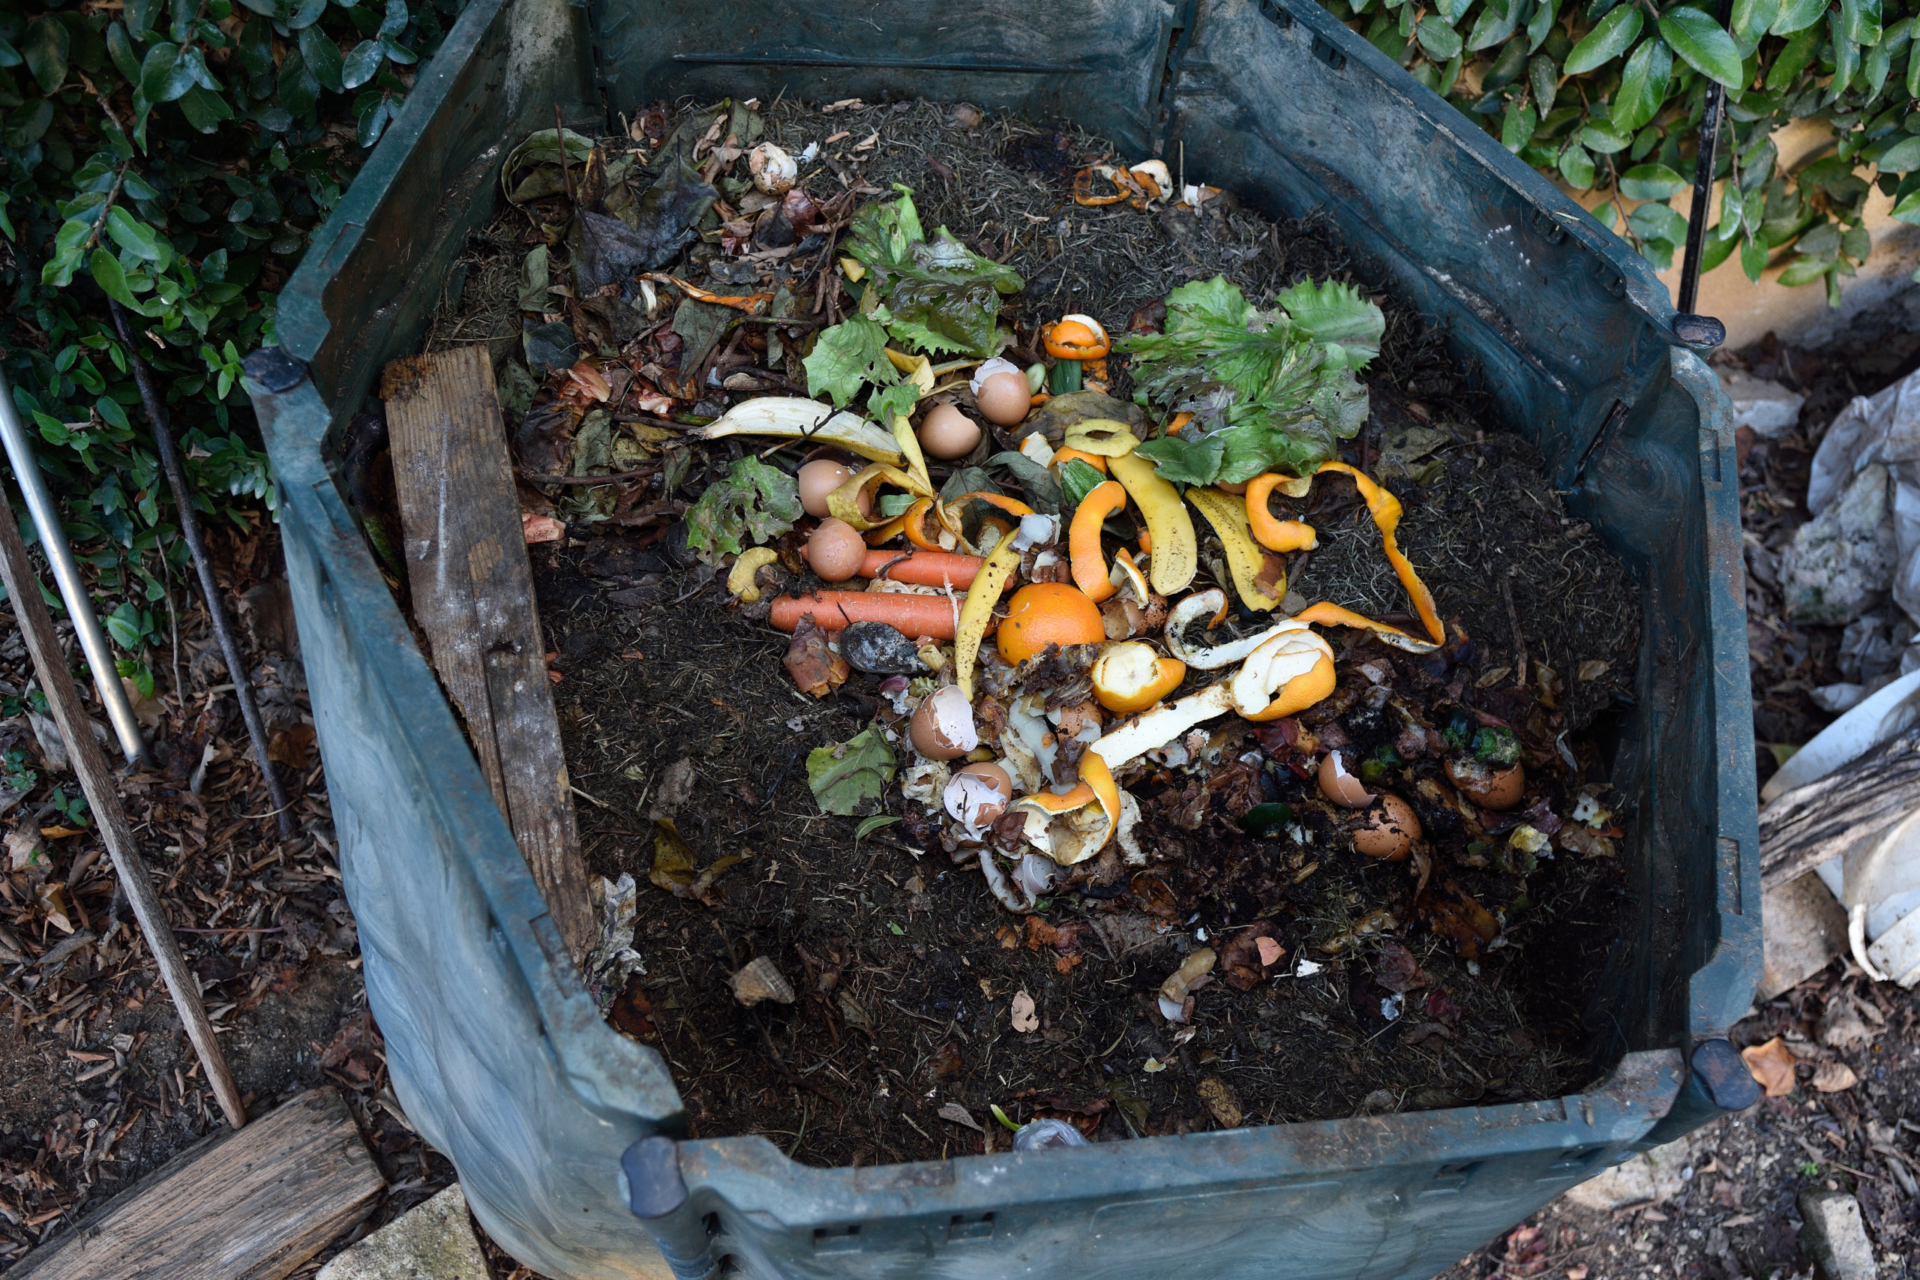 Composting pile with scraps of food